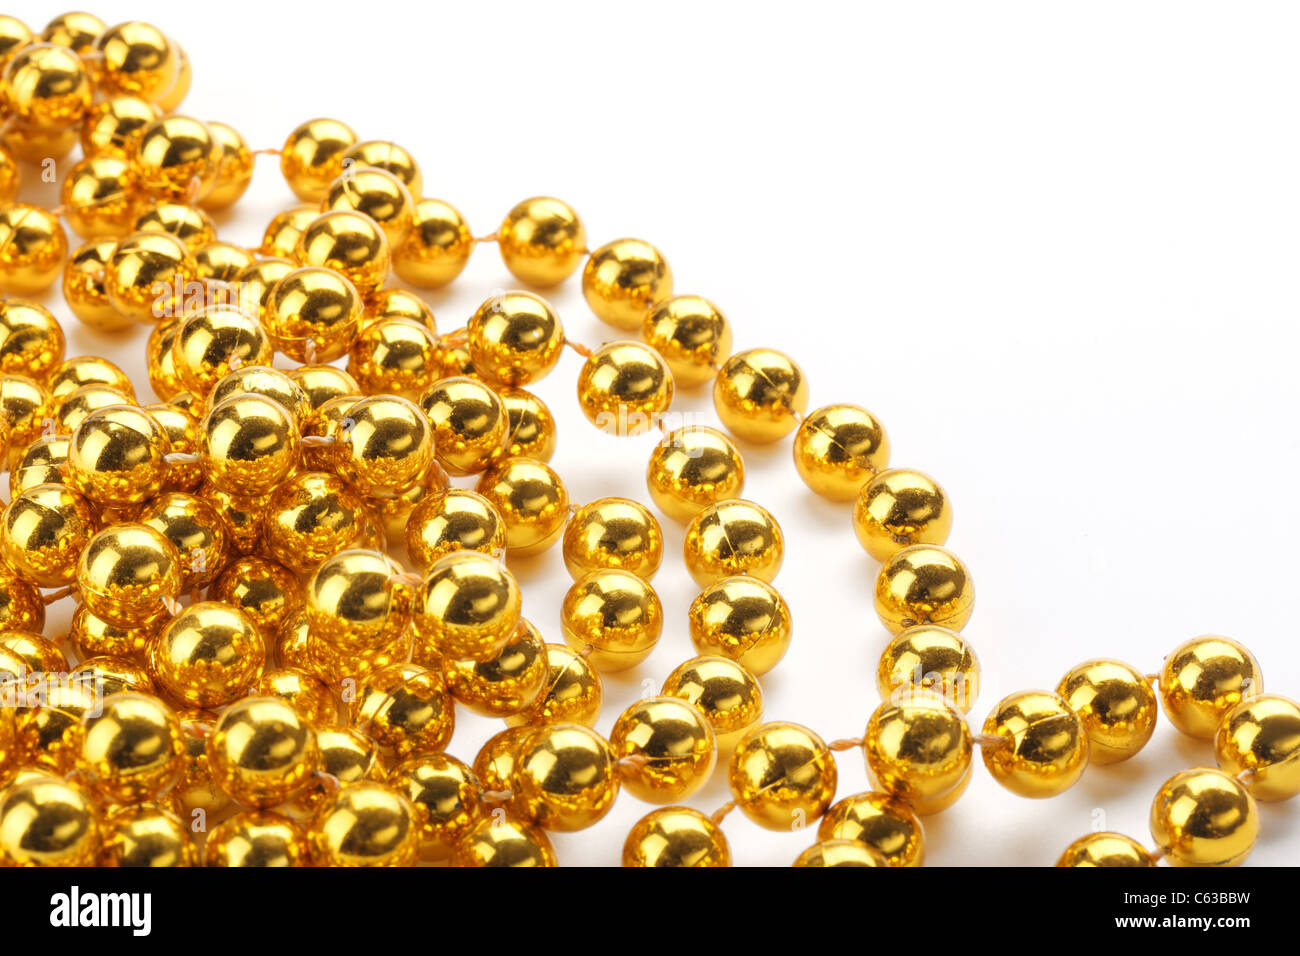 Golden color beads on white background. Stock Photo